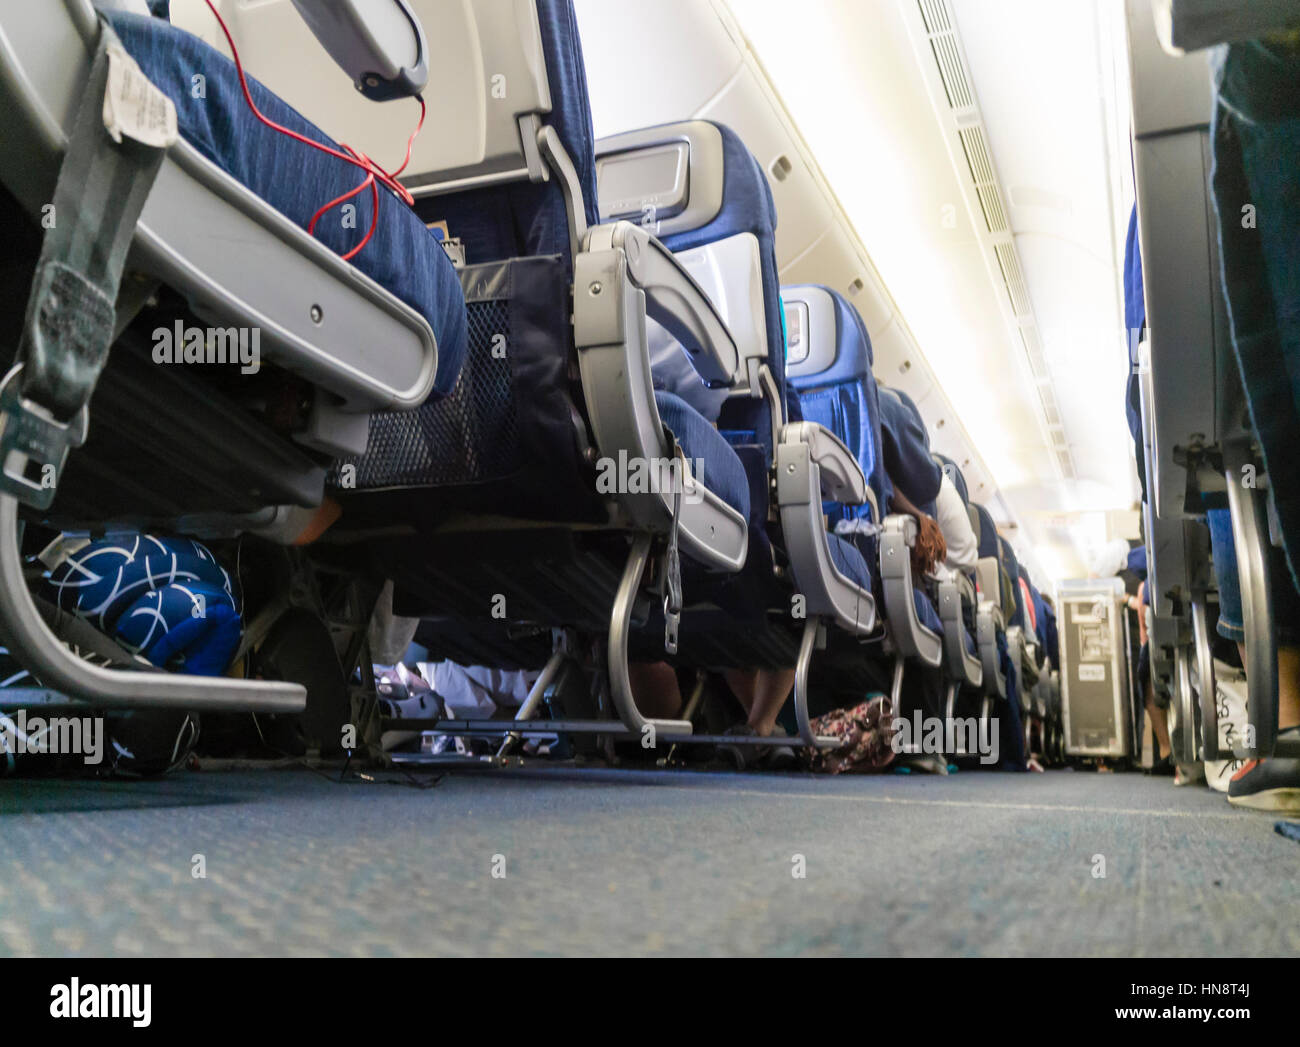 Looking down the aisle inside  the cabin of a passenger airplane during flight. Stock Photo